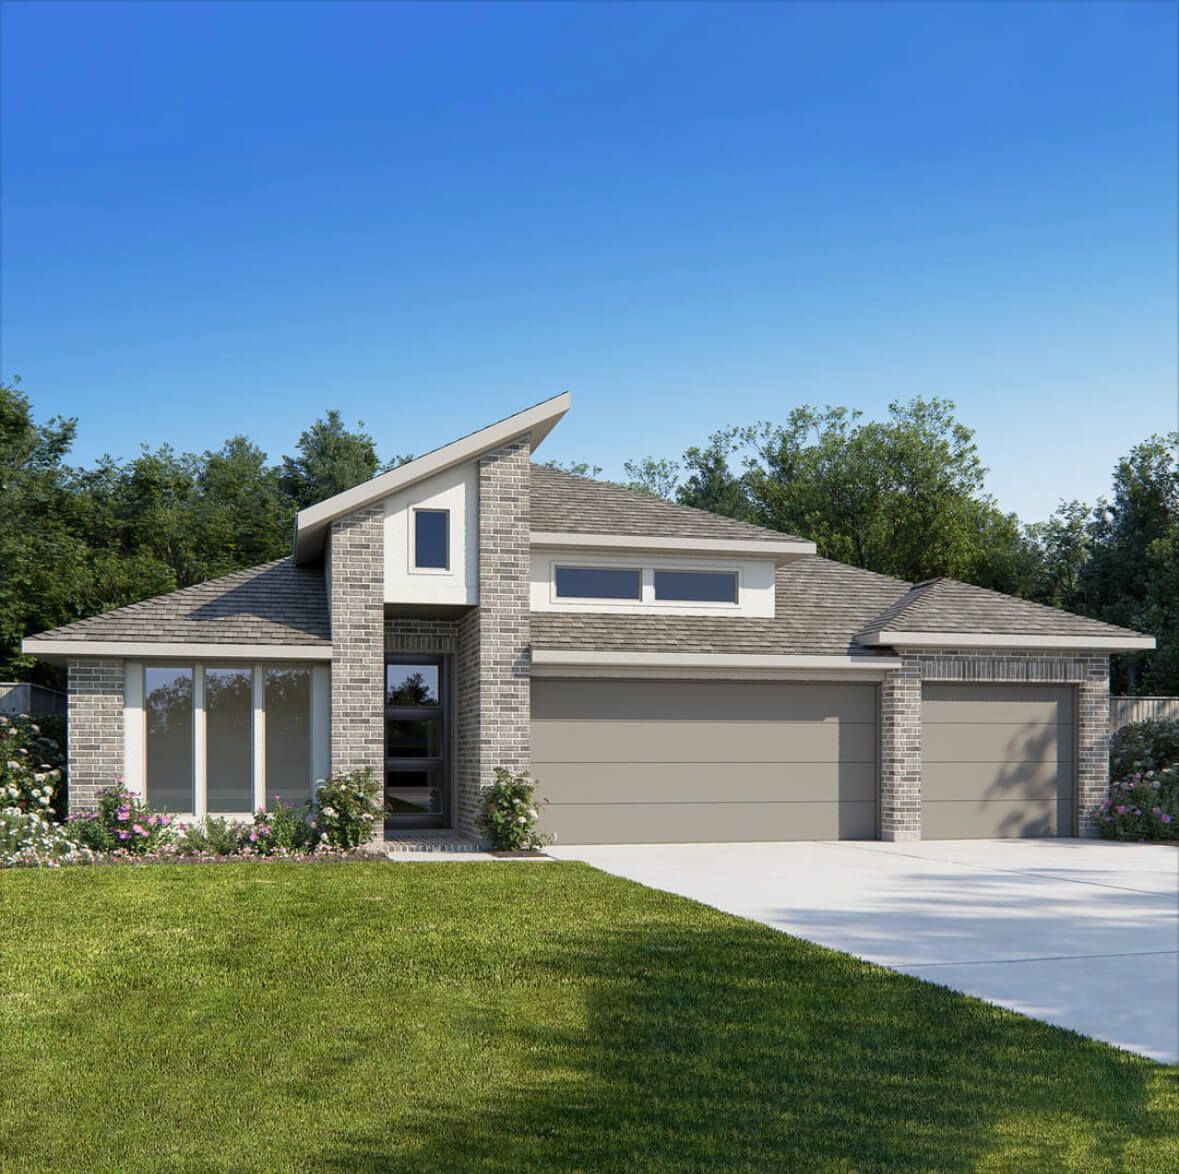 Perry Homes model home render in the Meyer Ranch community